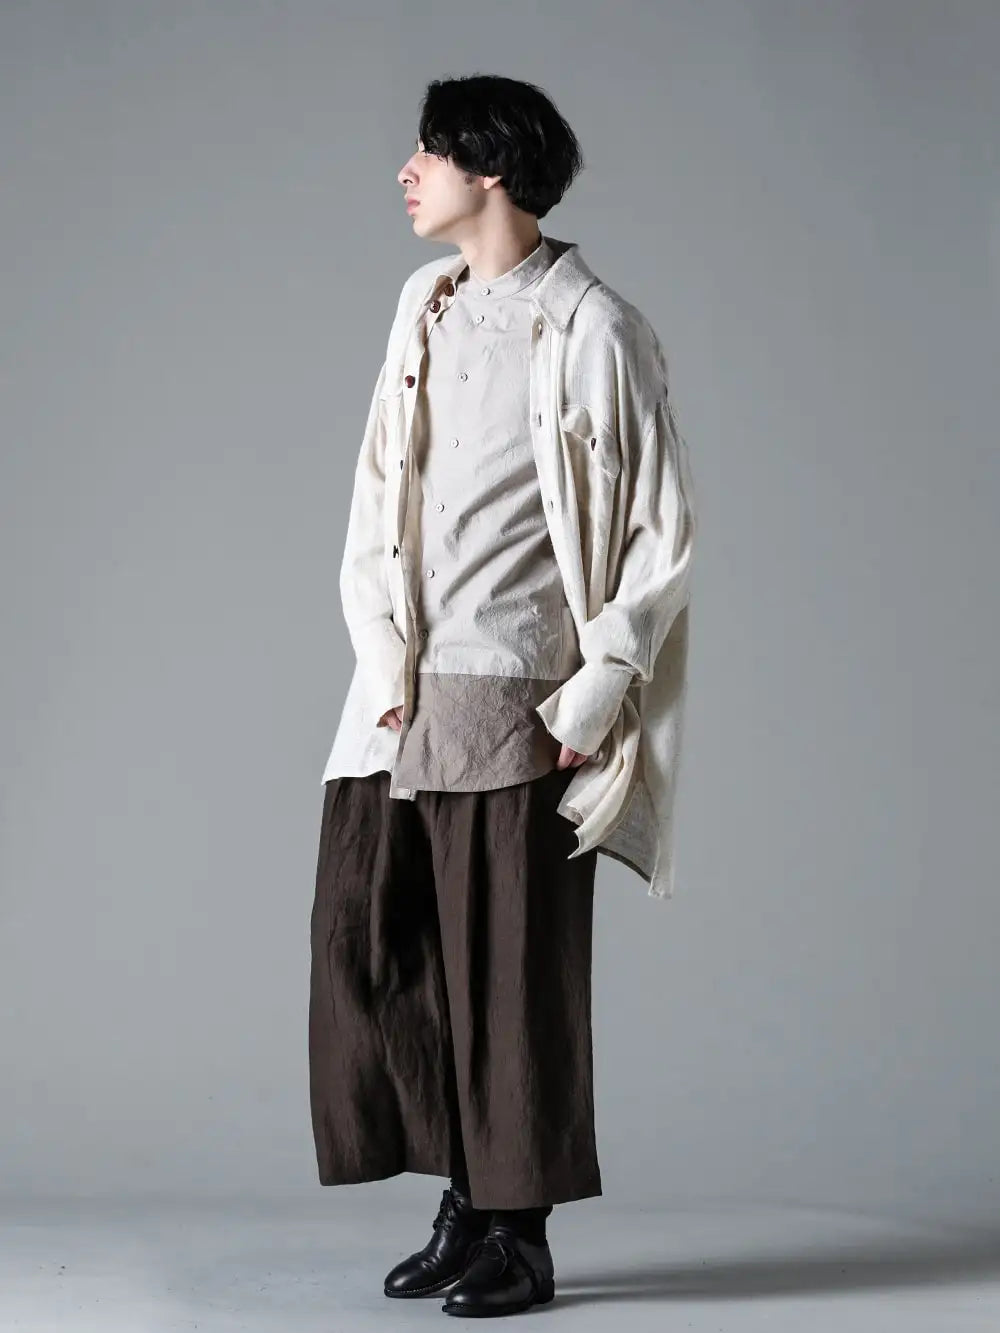 Peng Tai DEVOA ZIGGY CHEN GUIDI  24SS スタイリング - Choose items that go well with the three brands featuring distinct nuances - PTS24M06-2 Hand Dye Double Pocket Oversized Shirt SHE-CTKM Shirt Cotton 0M2410509 Plaited Extra Wide Leg Trousers Classic Derby Shoes Lace Up Single Sole - Horse Full Grain - 992X Black 1-002